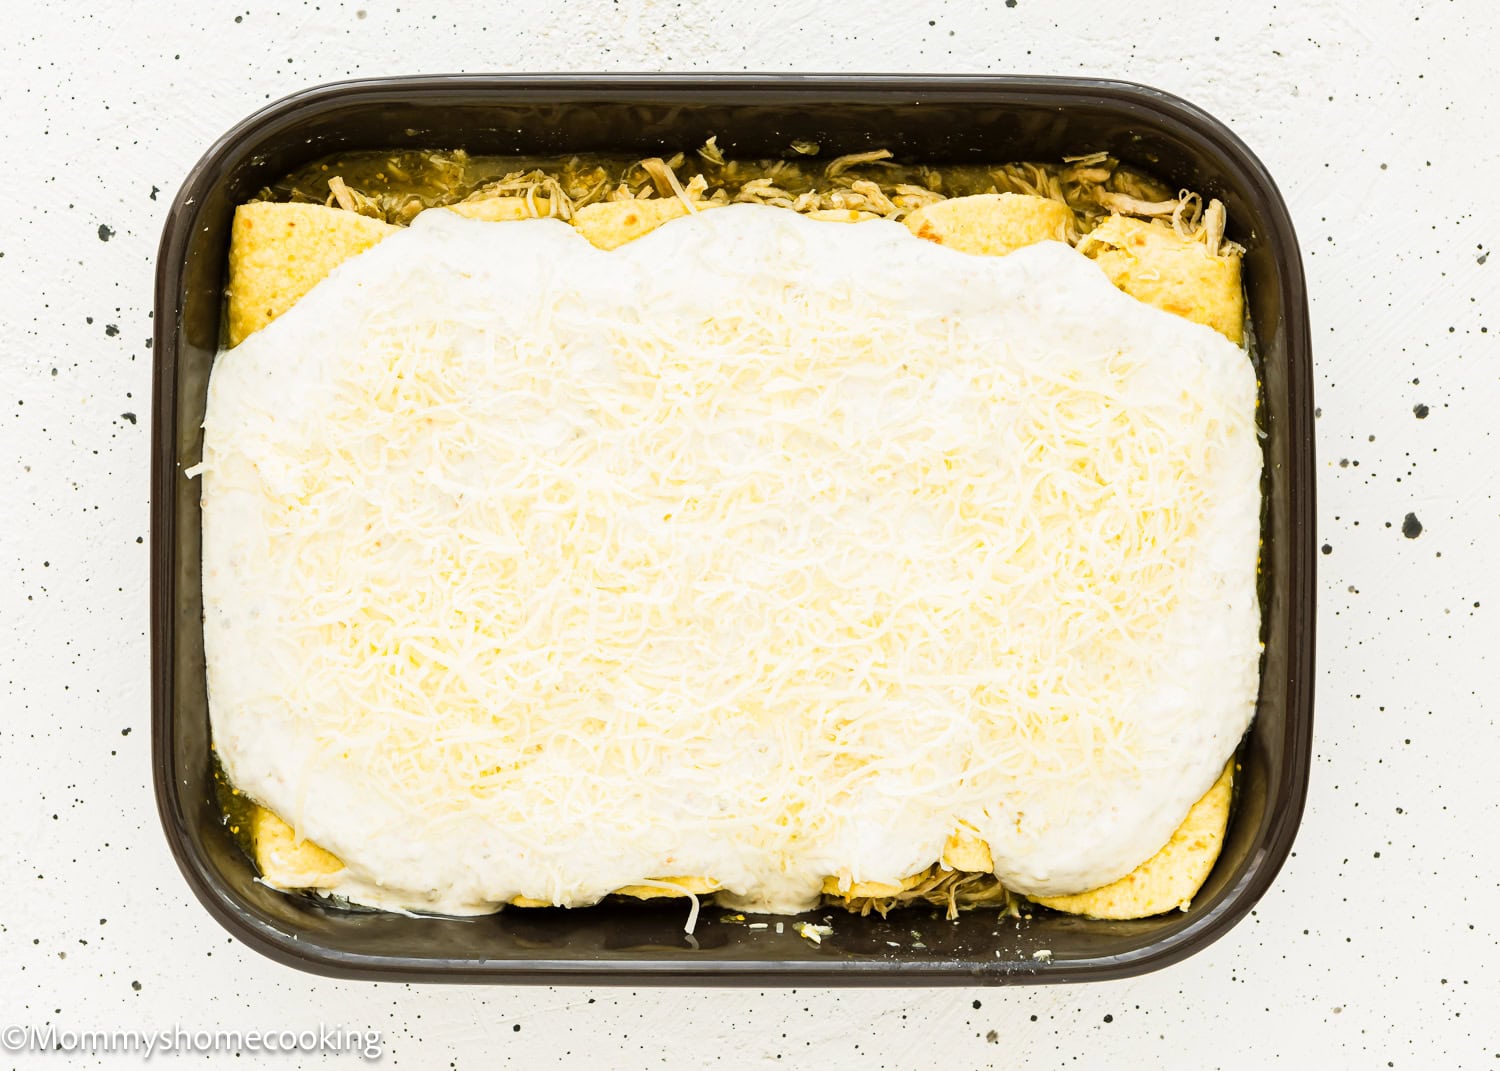 unbaked Enchiladas Suizas in a casserole dish with cream and cheese on top.